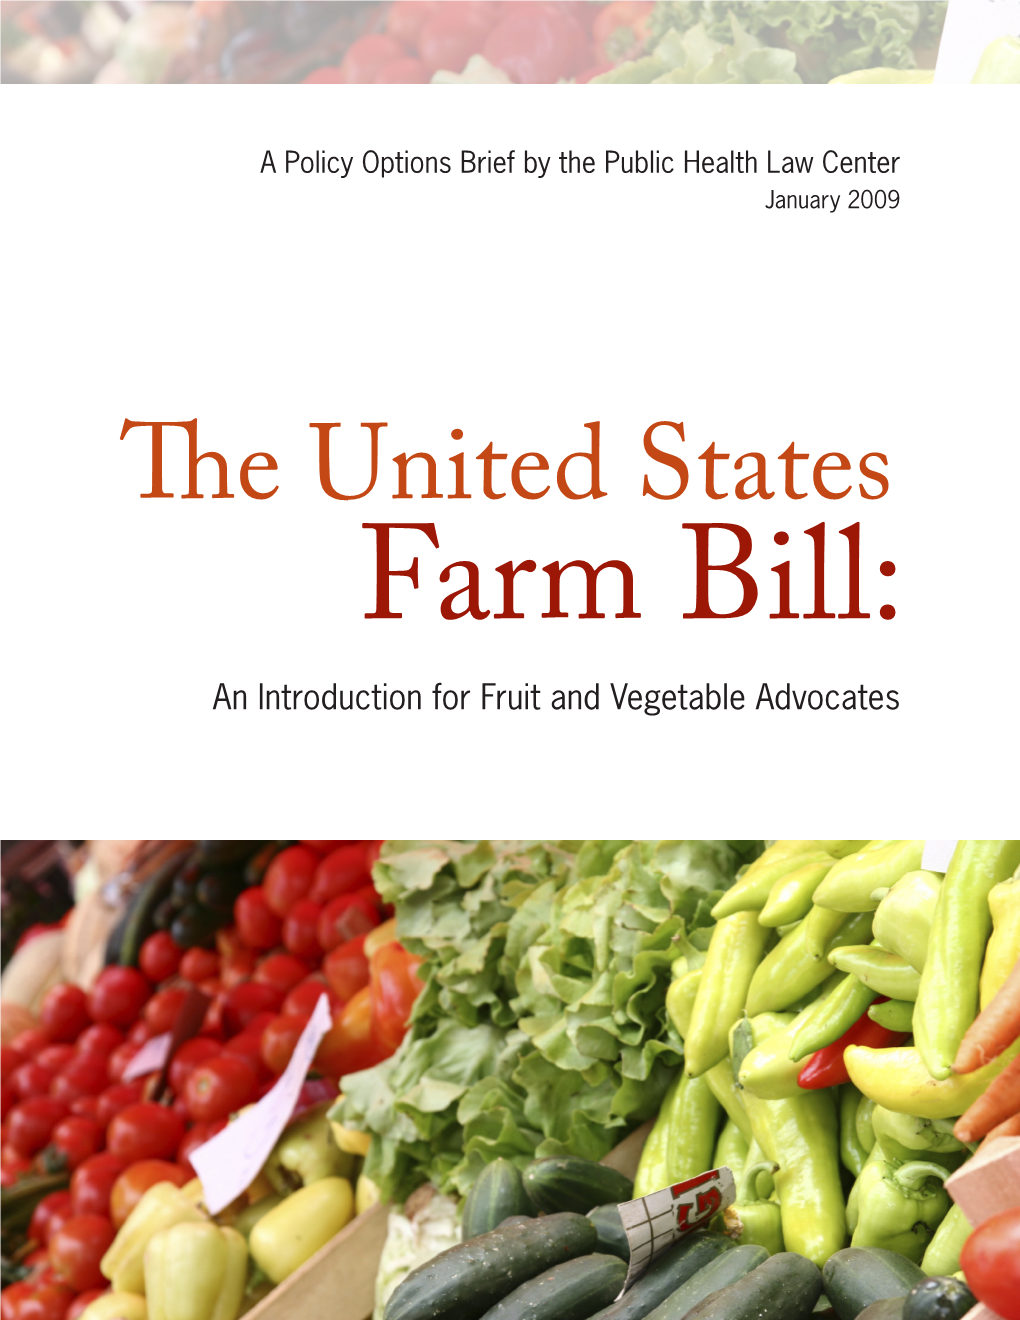 The United States Farm Bill: an Introduction for Fruit and Vegetable Advocates